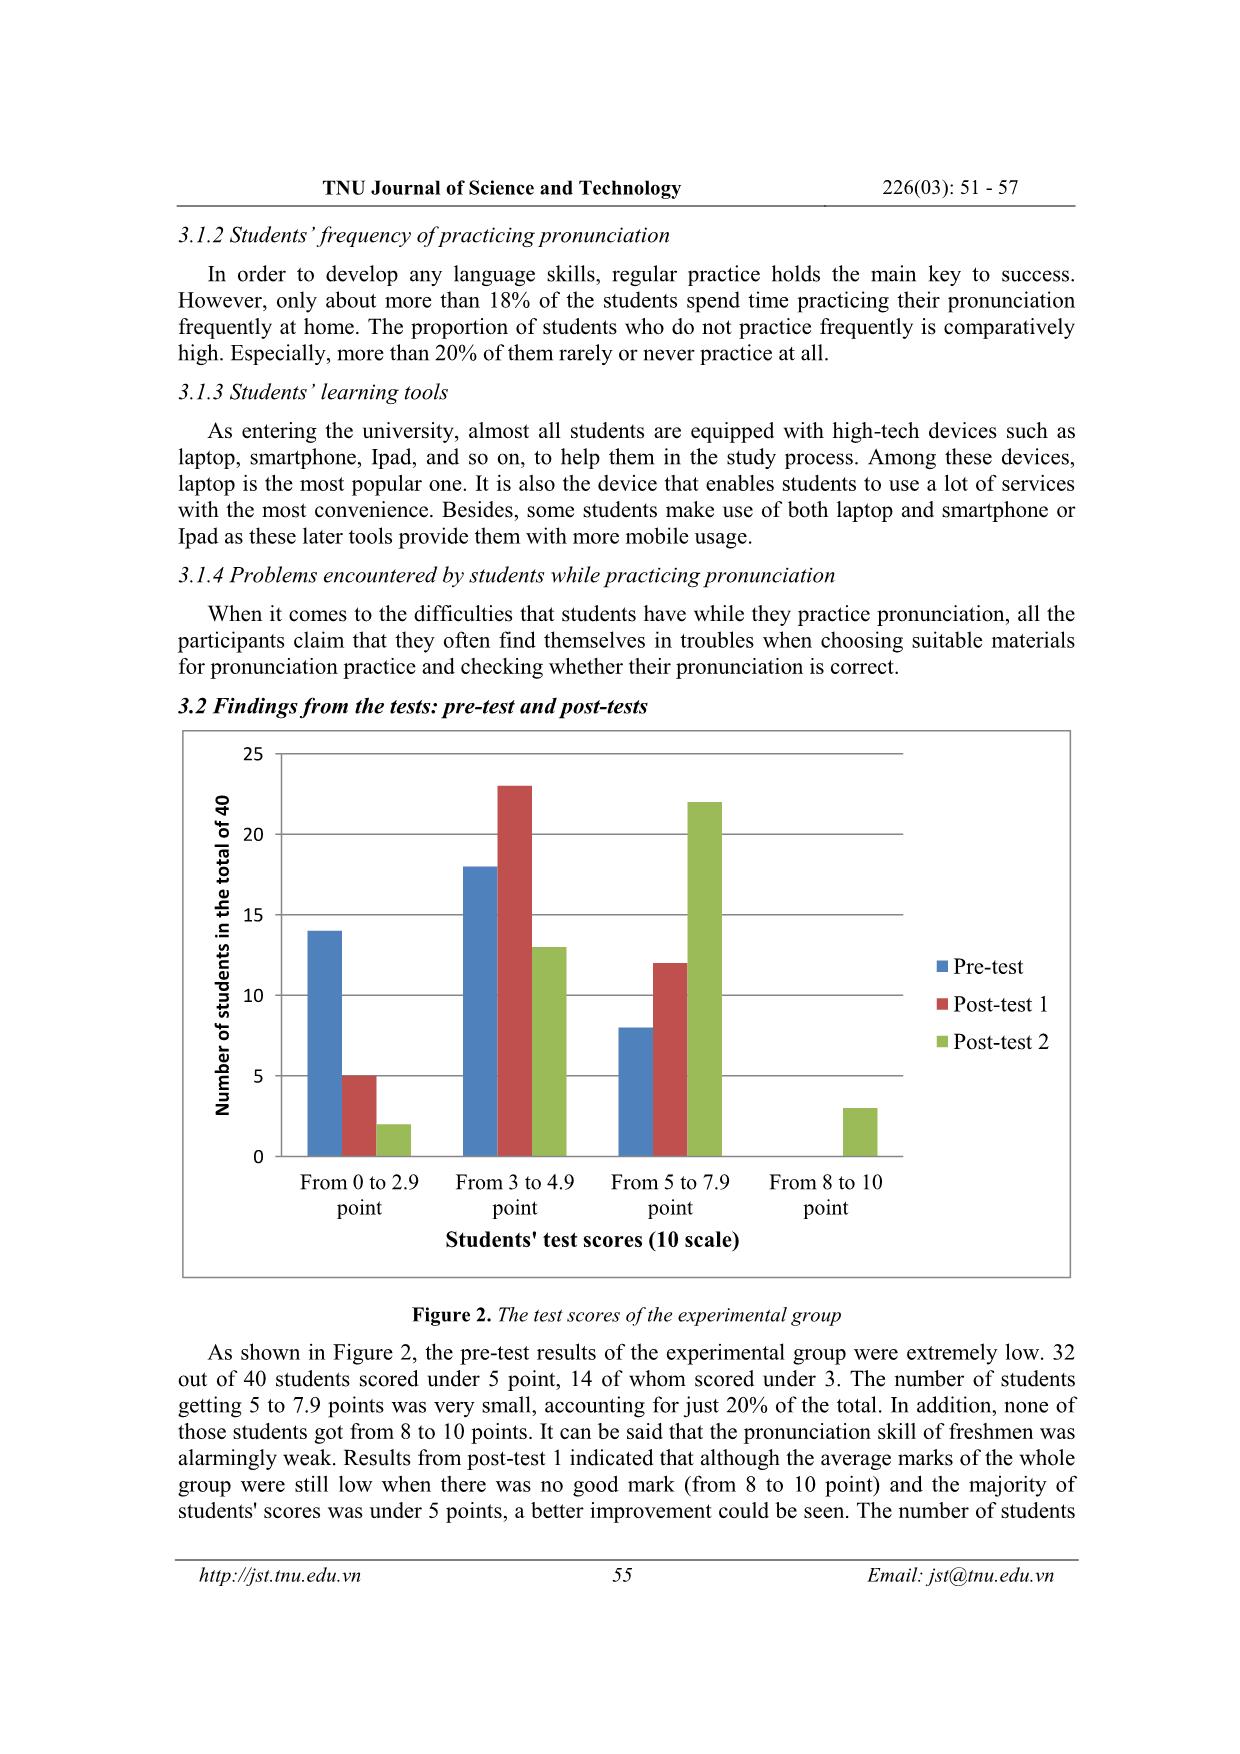 The effectiveness of otter application in improving english freshmen’s pronunciation at school of foreign languages - Thai nguyen university trang 5